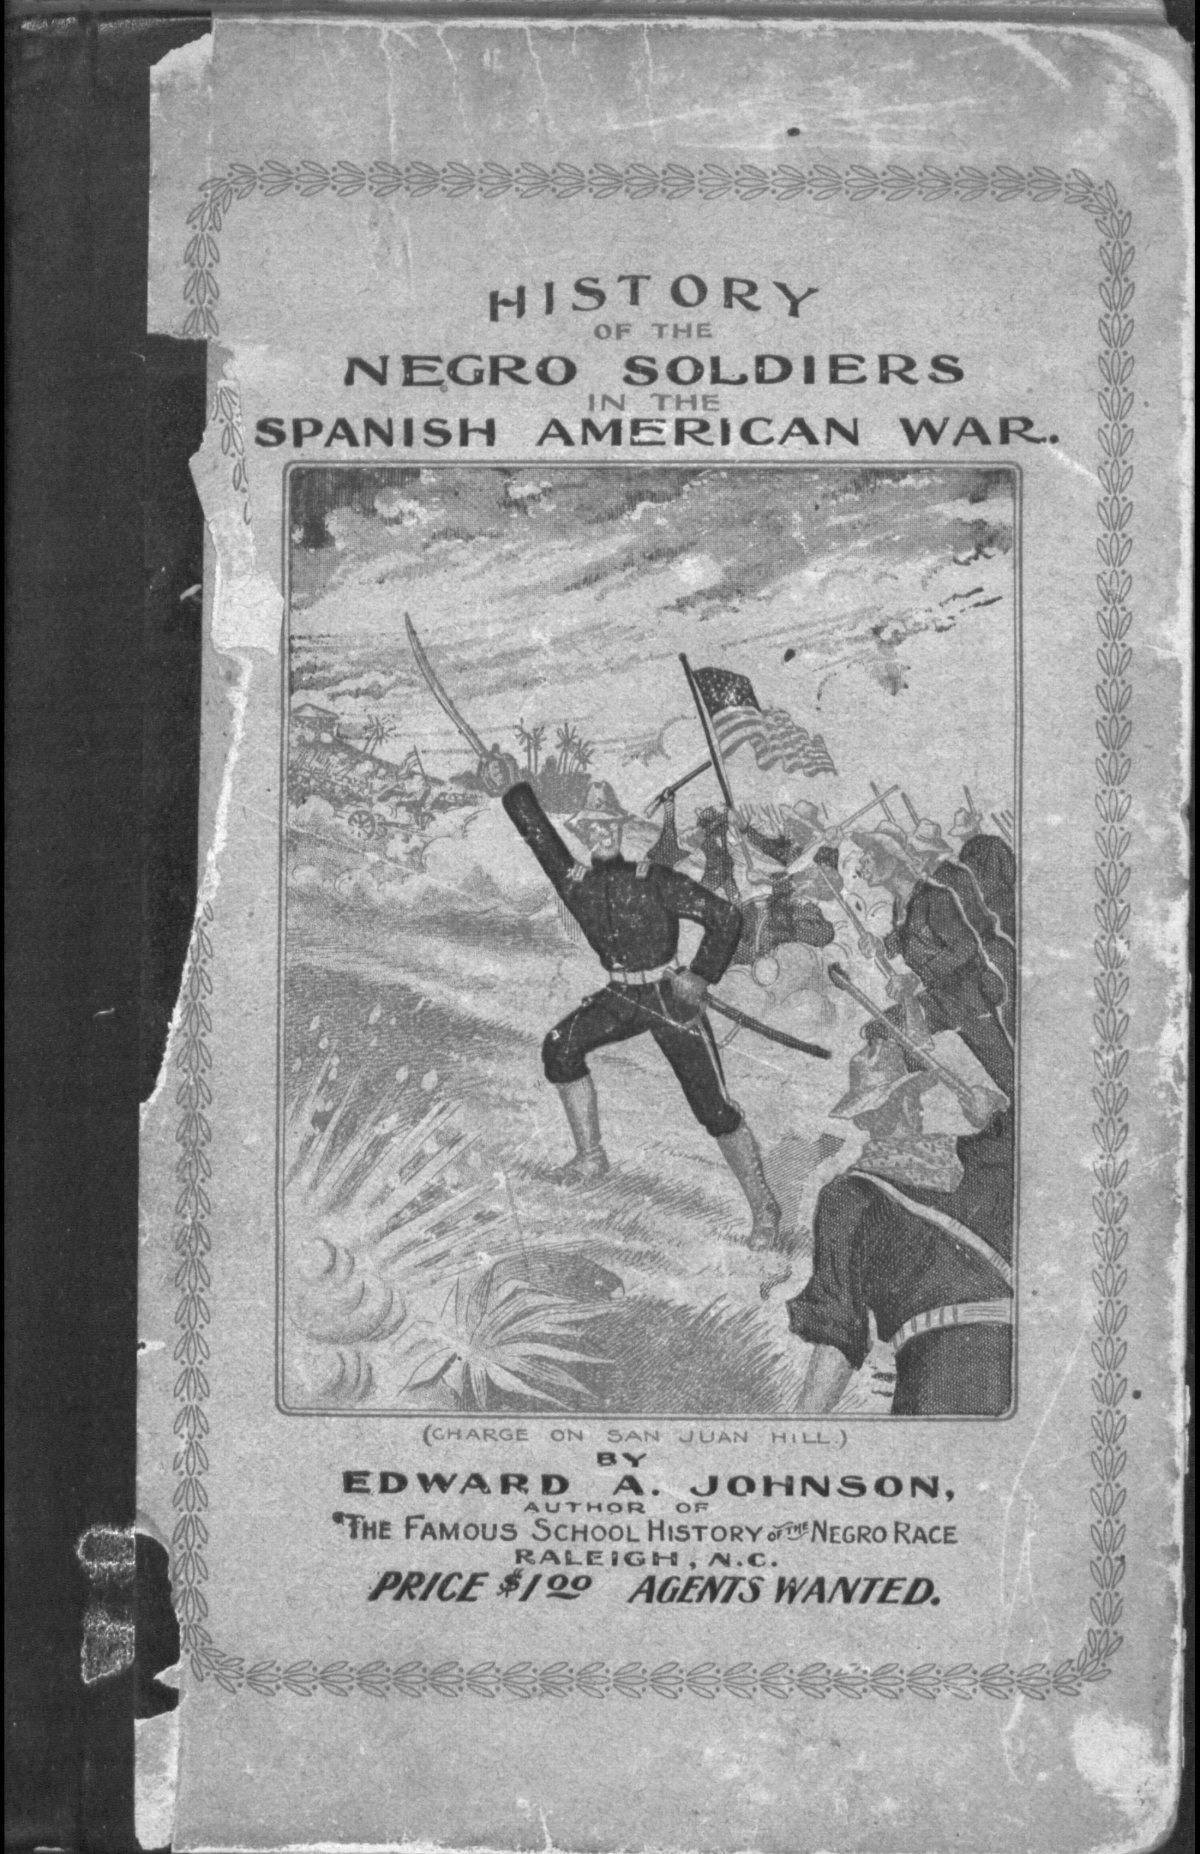 History of Negro soldiers in the Spanish-American War